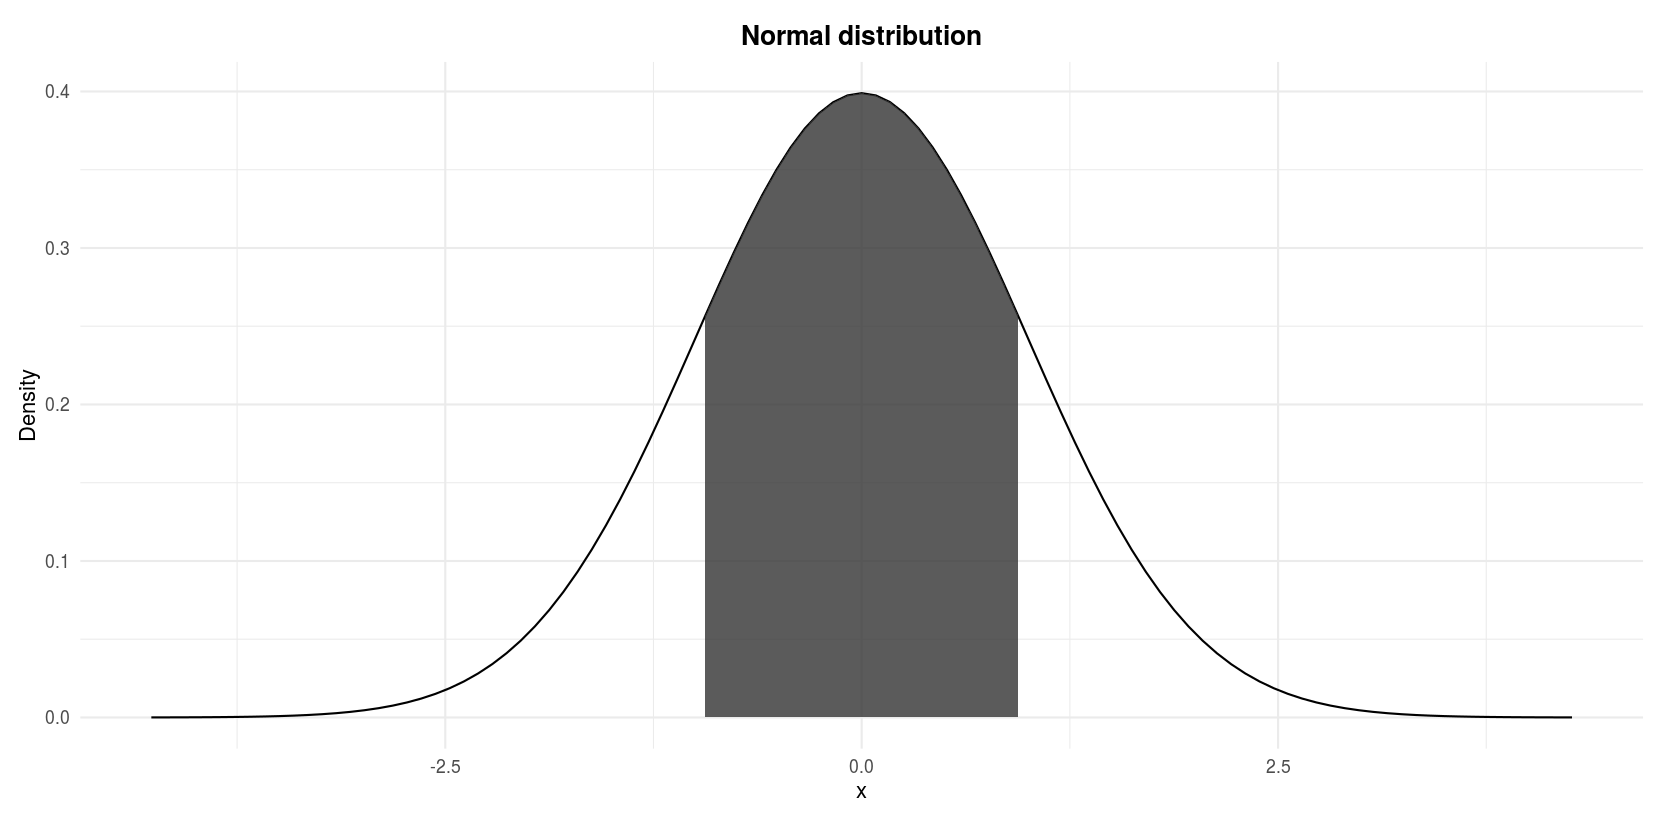 Do My Data Follow A Normal Distribution A Note On The Most Widely Used Distribution And How To Test For Normality In R Stats And R